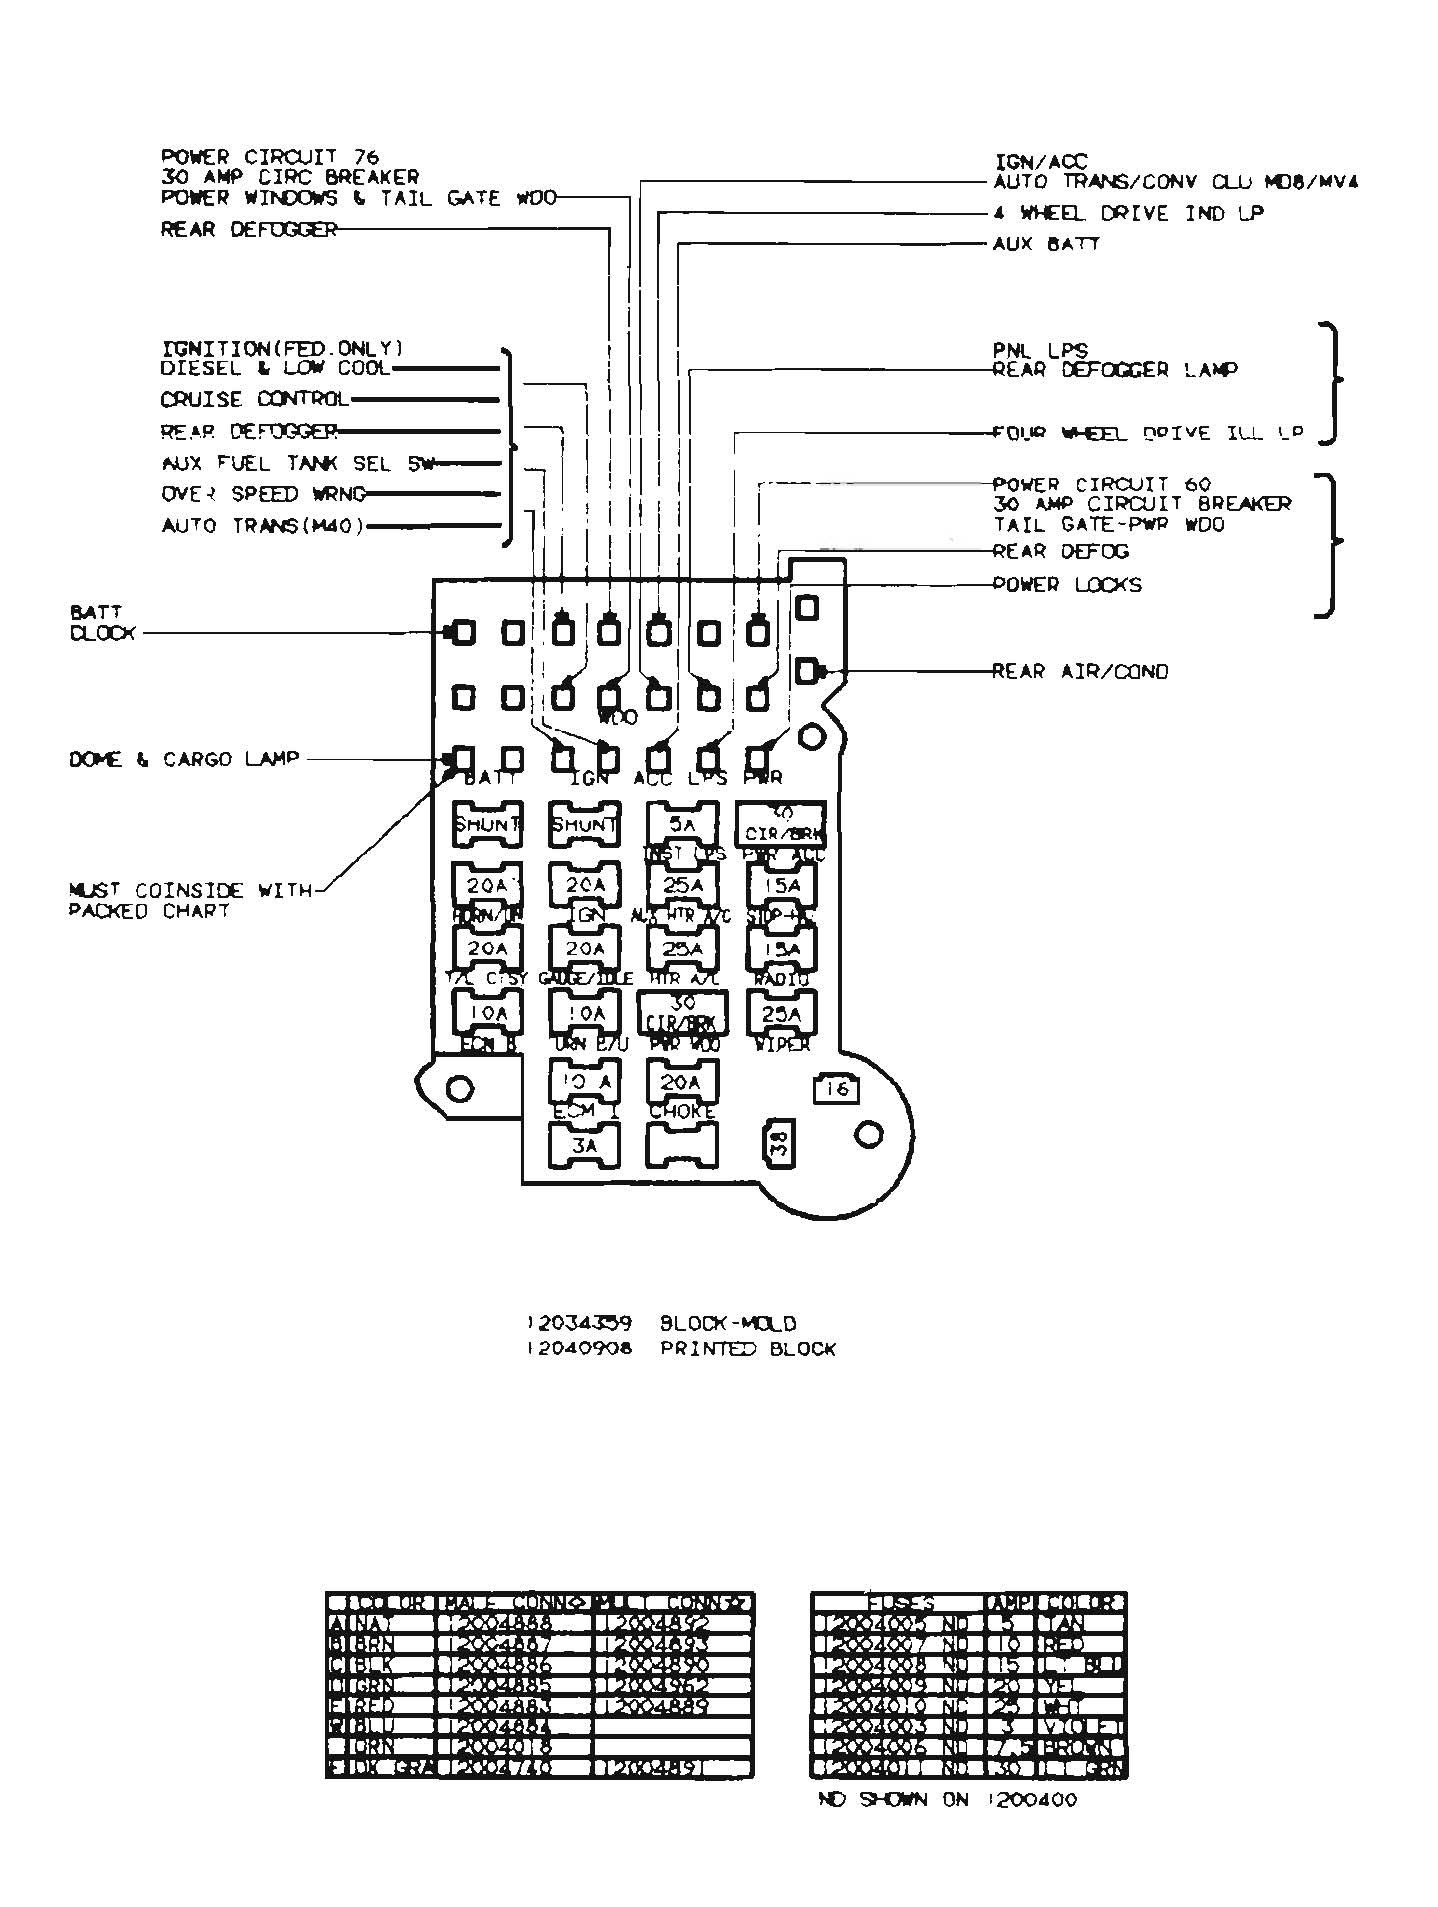 1990 Chevy Fuse Box - Wiring Diagram Detailed - 1990 Chevy Truck Wiring Diagram